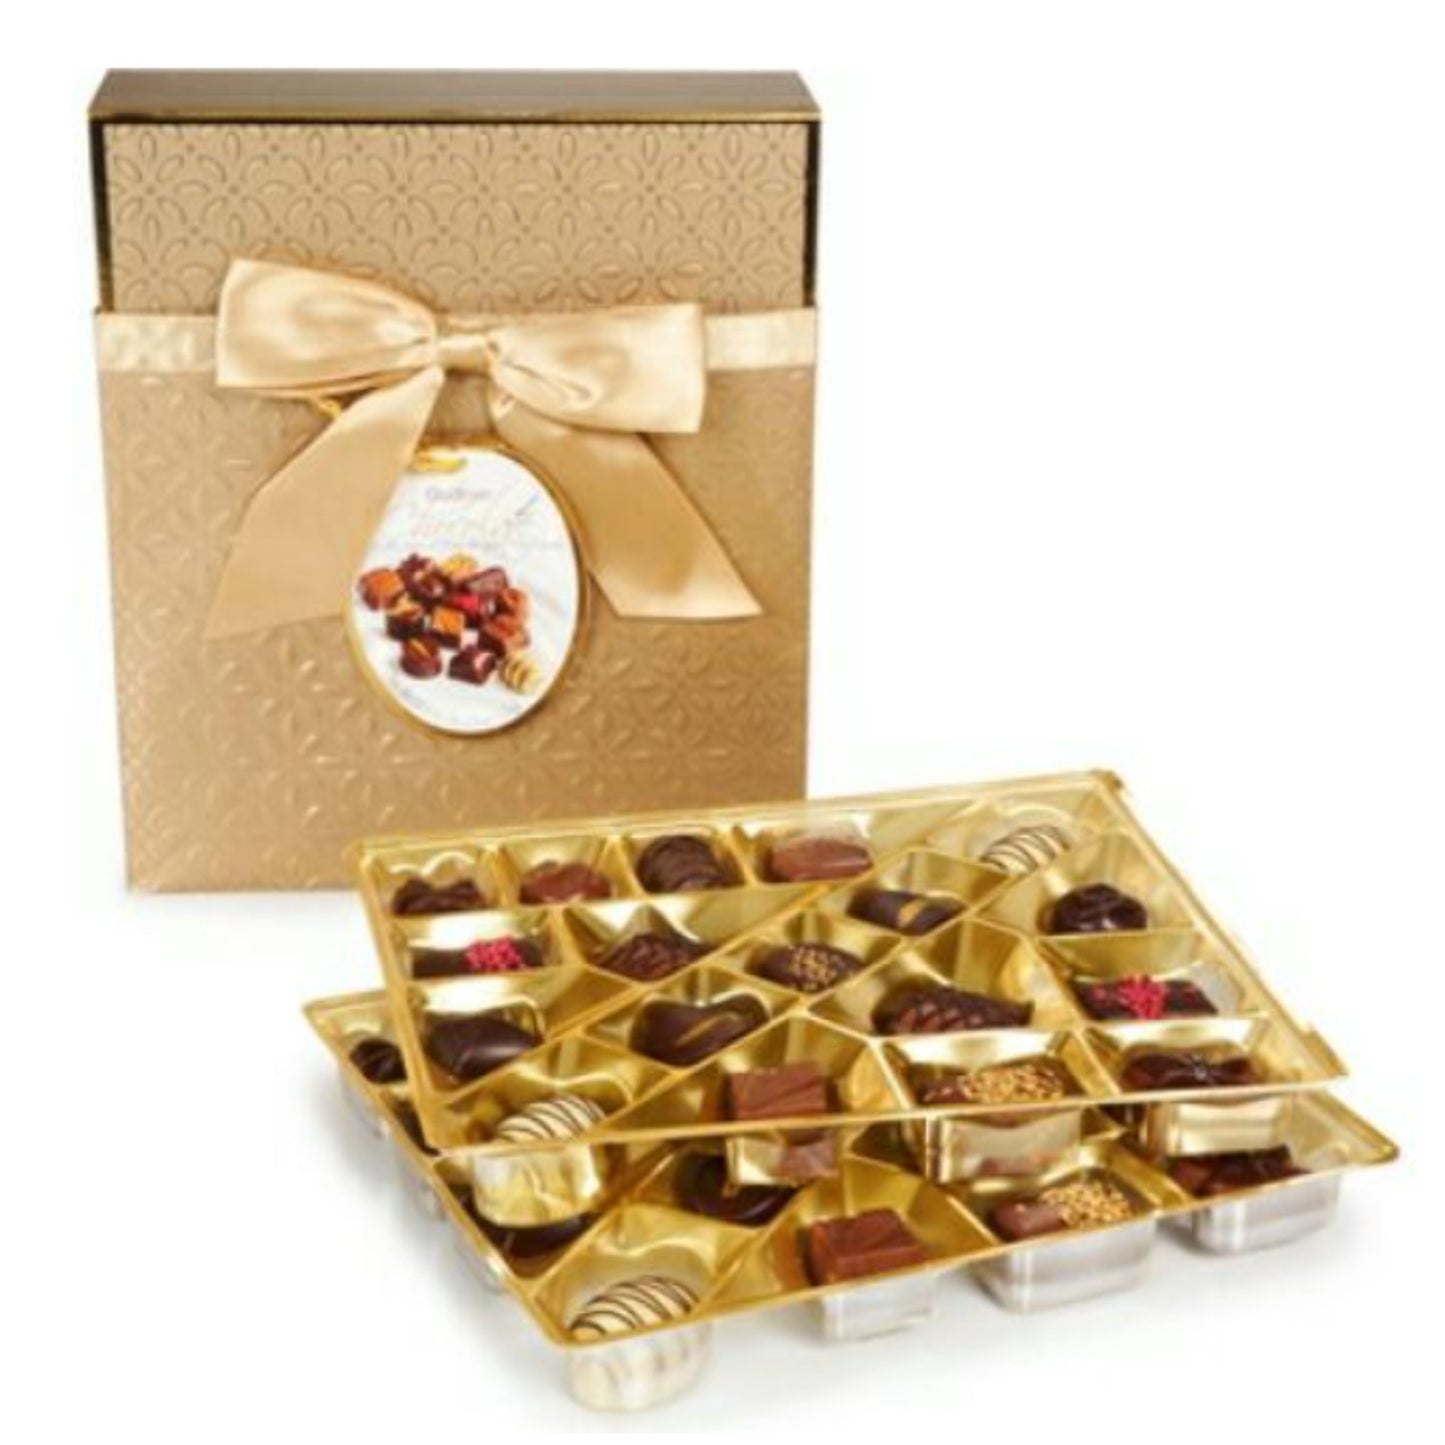 Gudrun Collection of Fine Belgian Chocolates Best Gift this Holidays - Gold Box